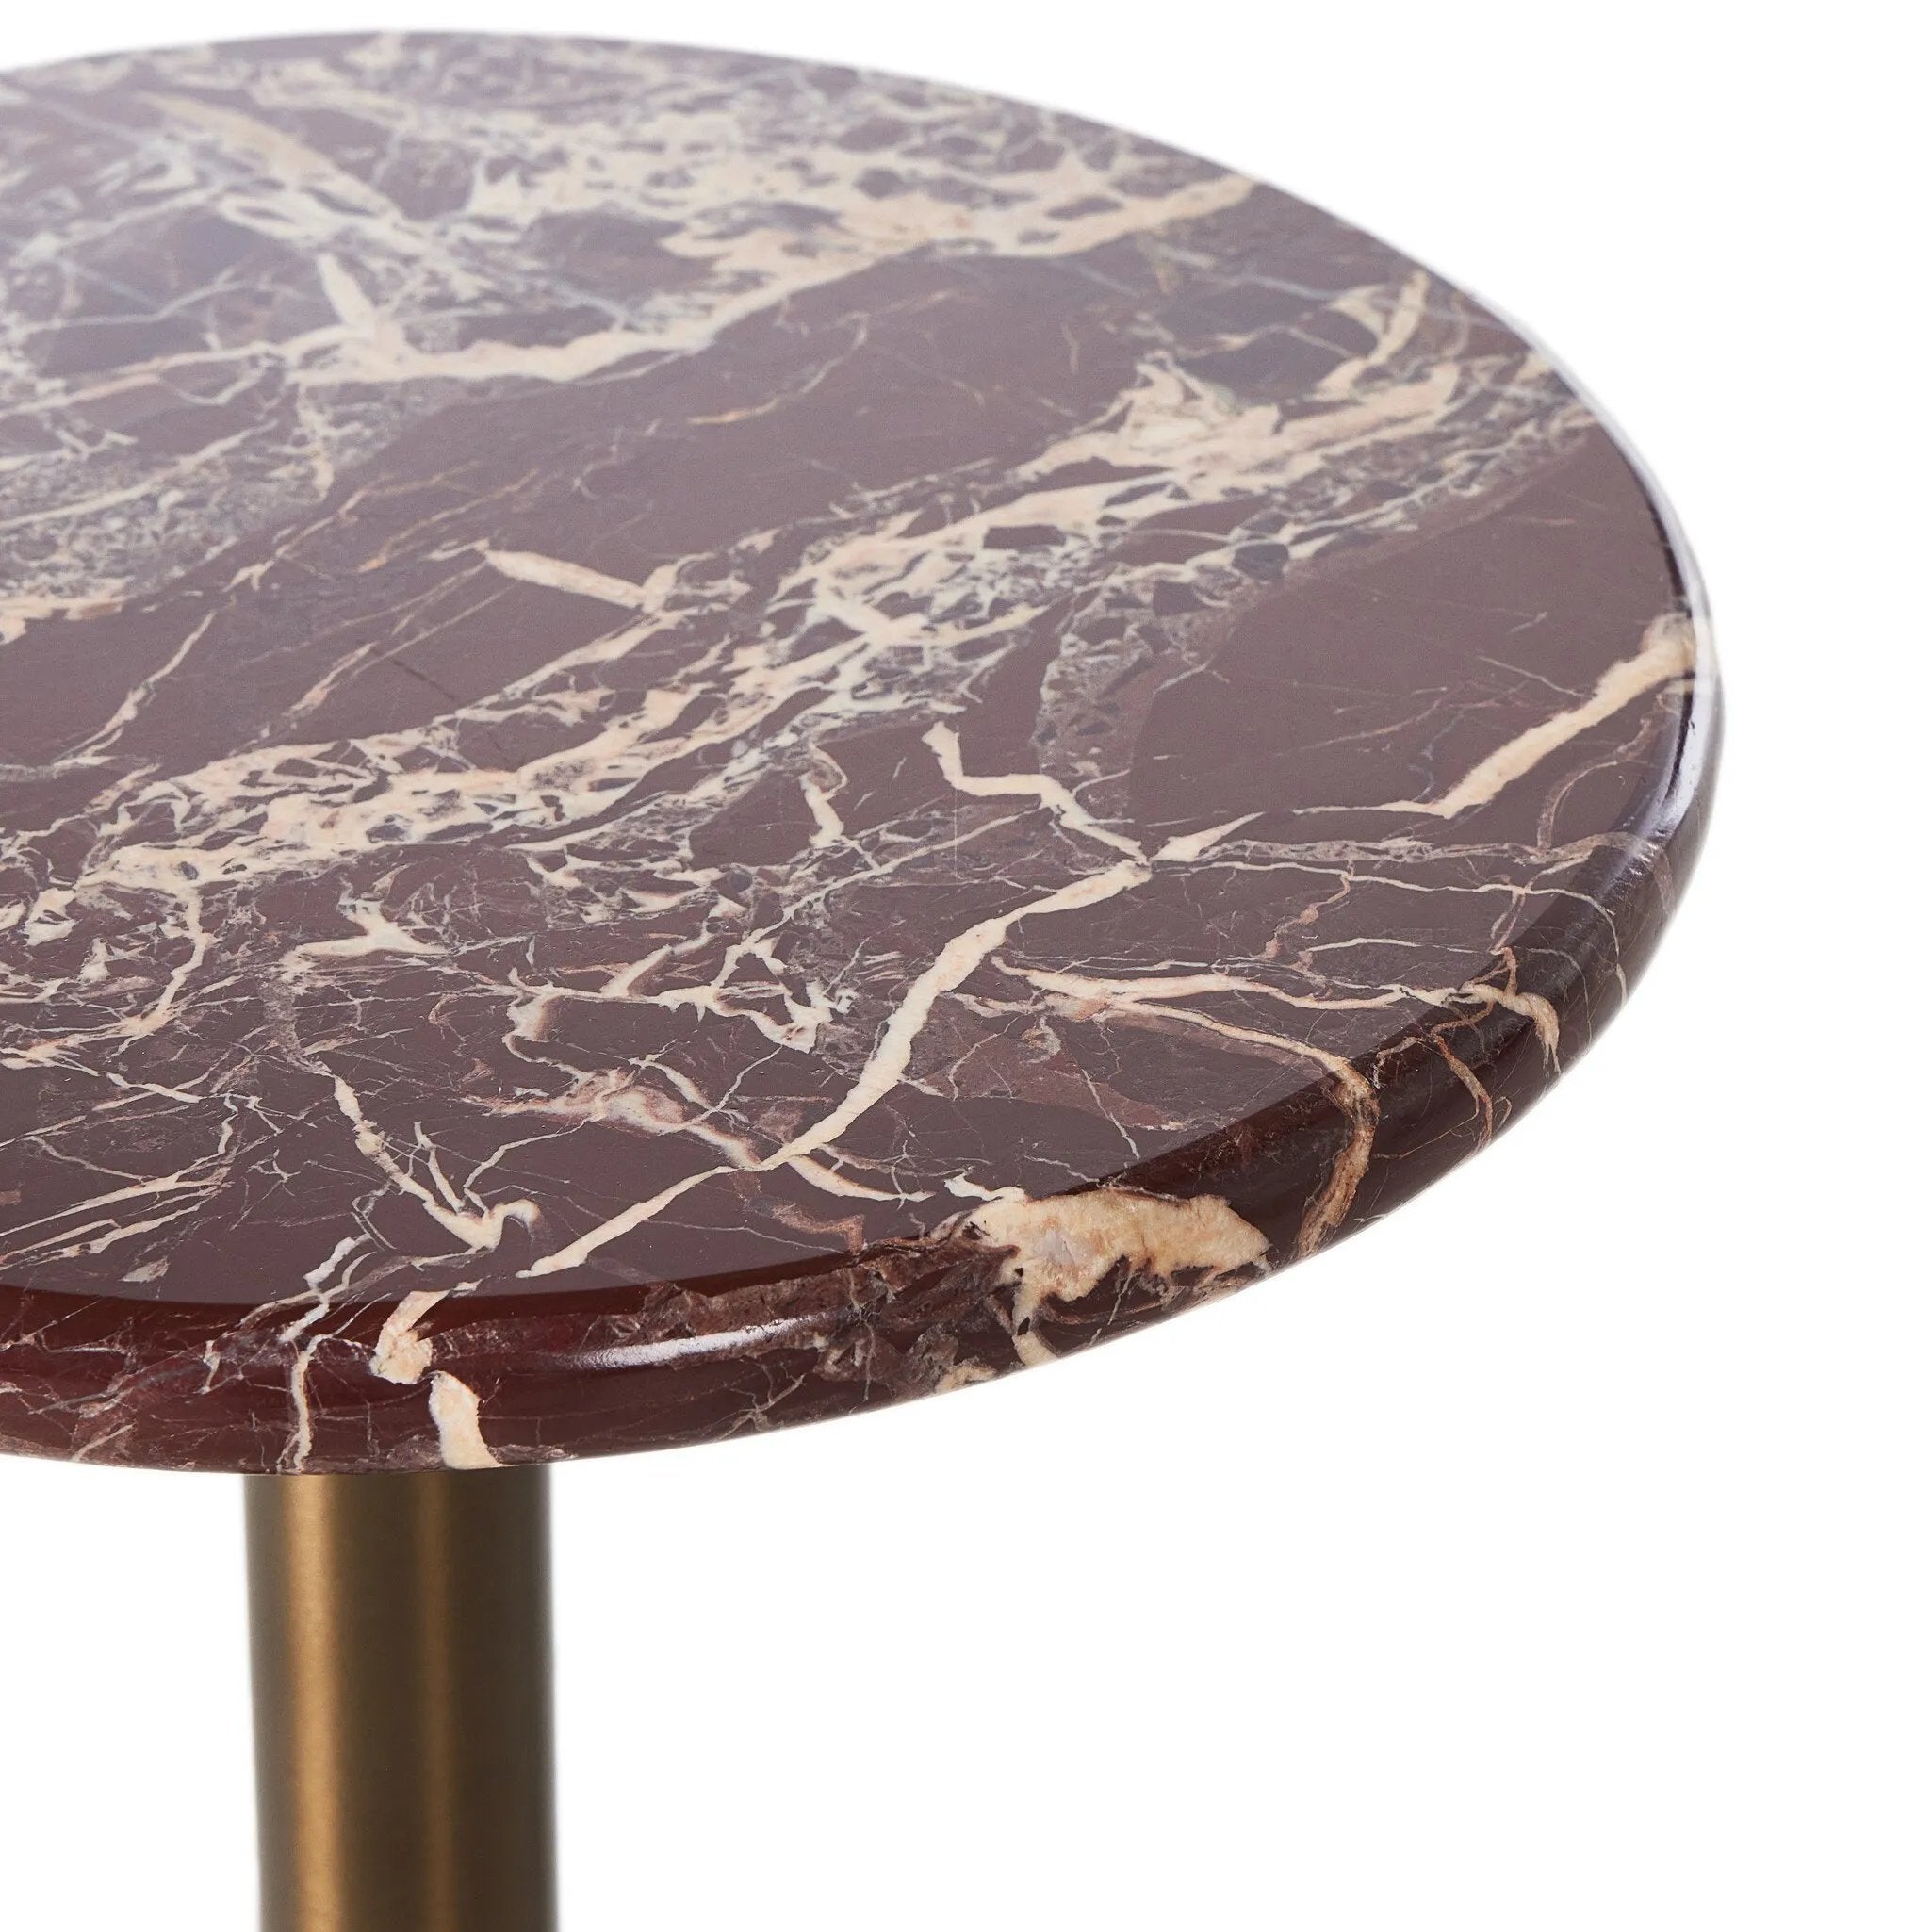 Stacked channels of heavy character marble ensure this end table stands out as a statement piece. At a convenient drink table size, it is complemented by a dark brass metal finish for a striking contrast.Collection: Marlo Amethyst Home provides interior design, new home construction design consulting, vintage area rugs, and lighting in the Portland metro area.